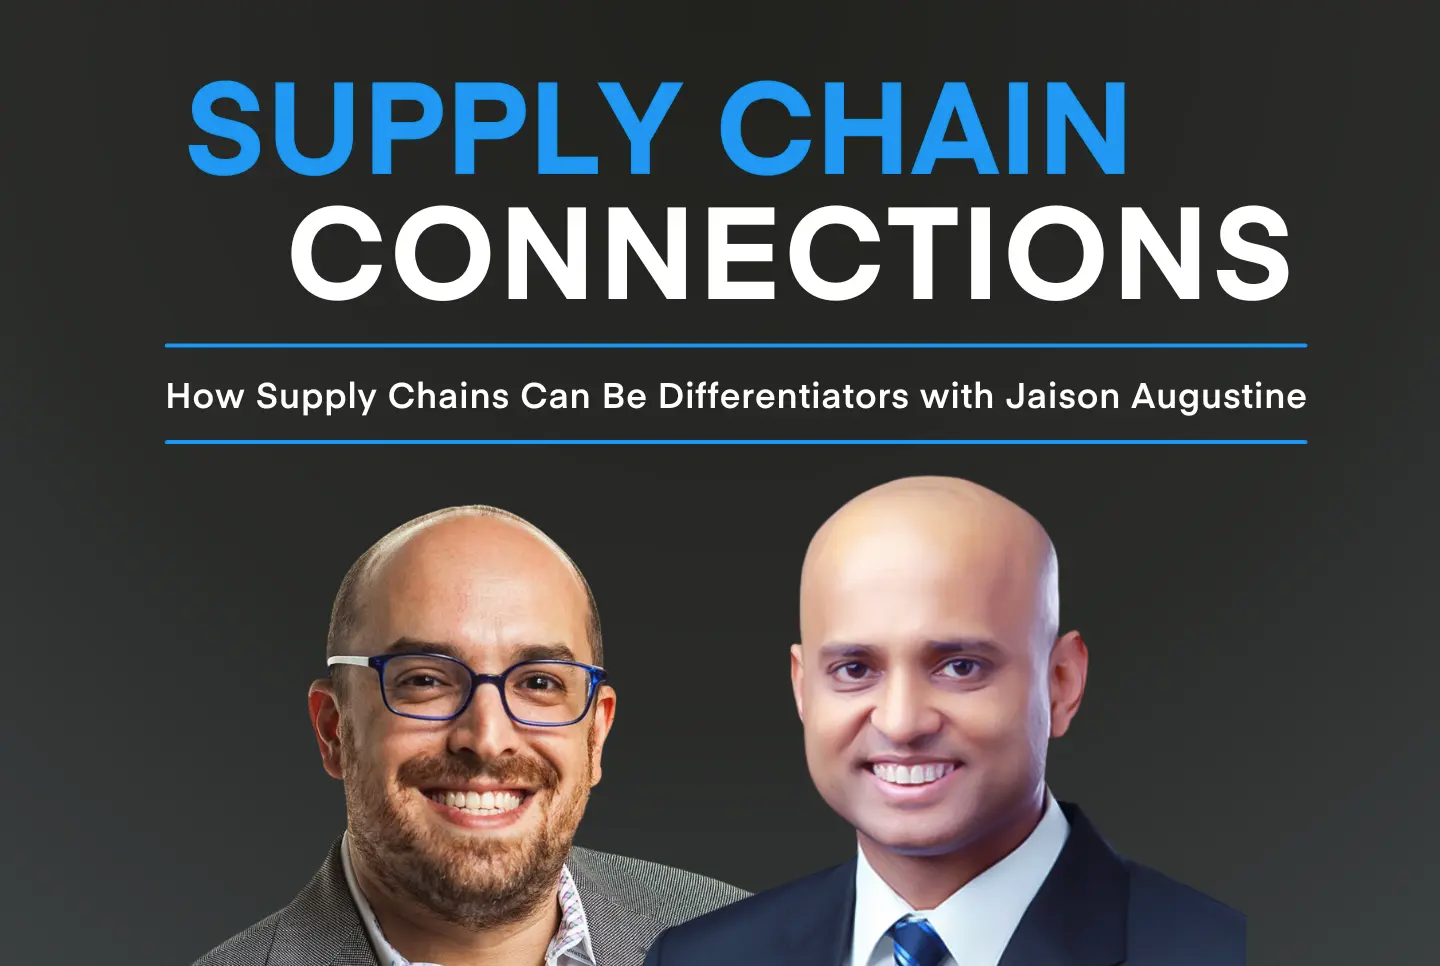 Jaison Augustine, WNS - Supply Chain Connections Podcast